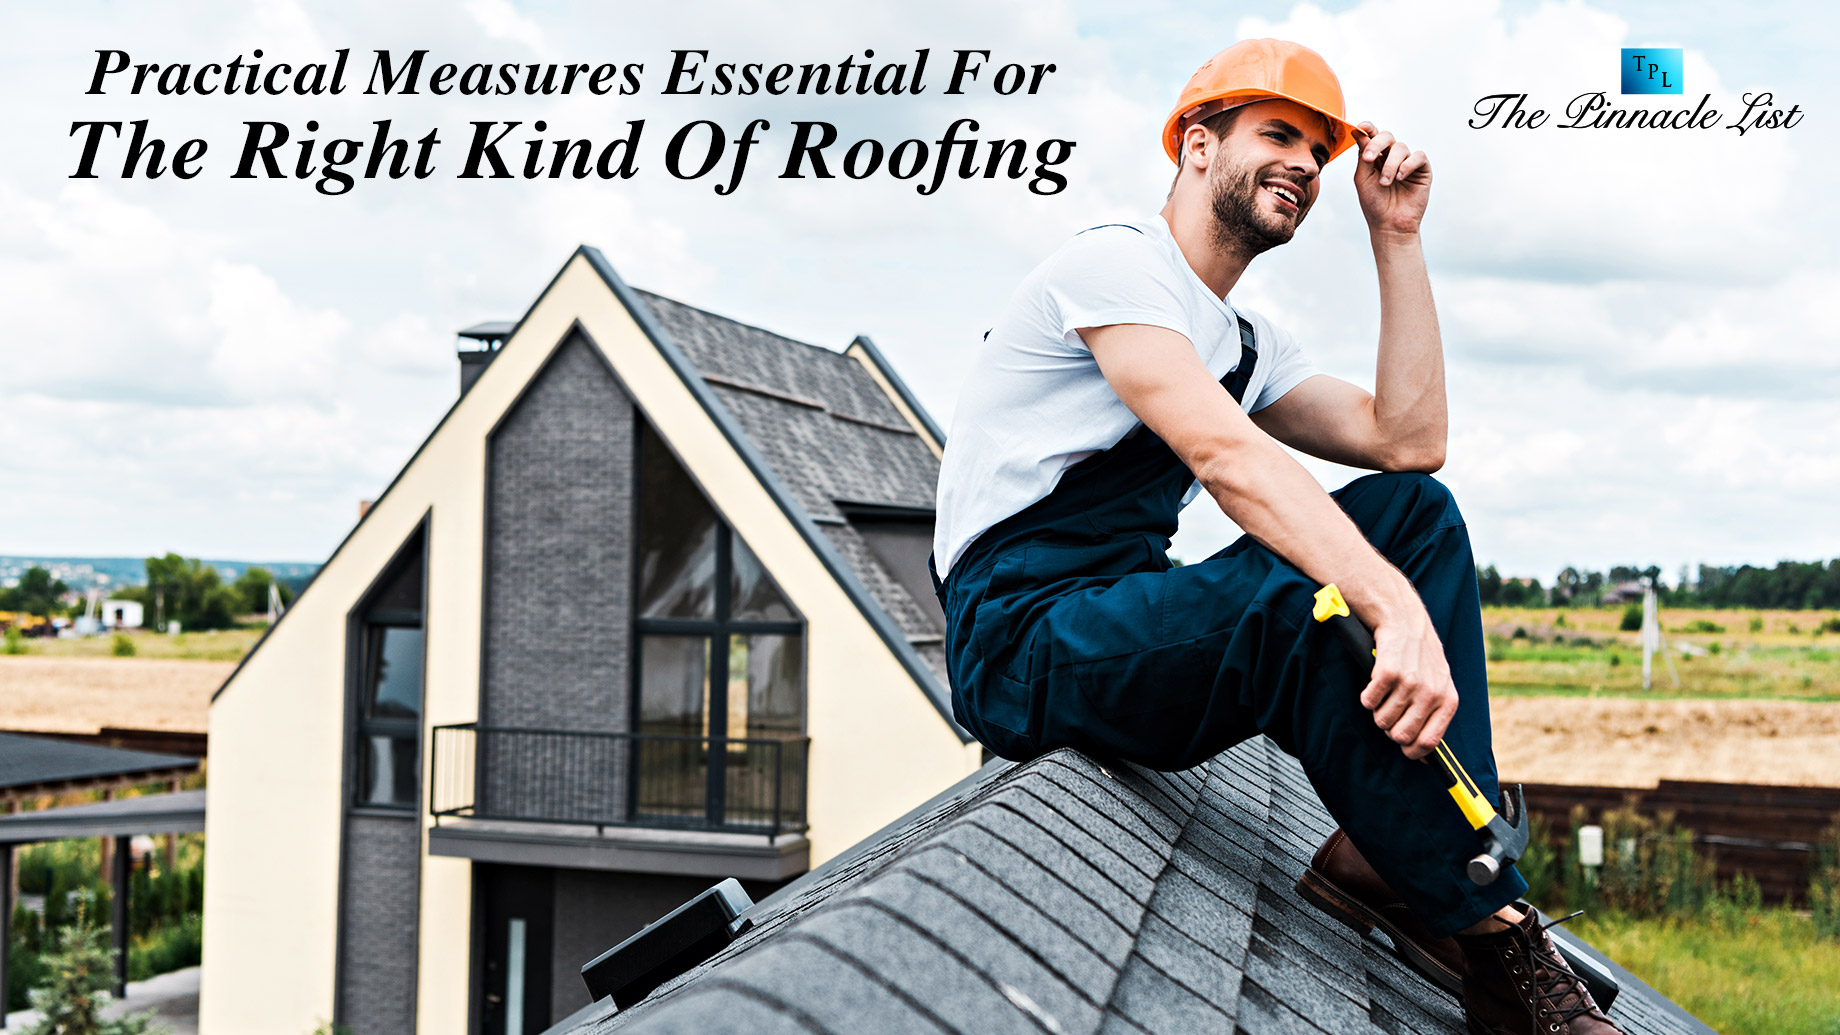 Practical Measures Essential For The Right Kind Of Roofing